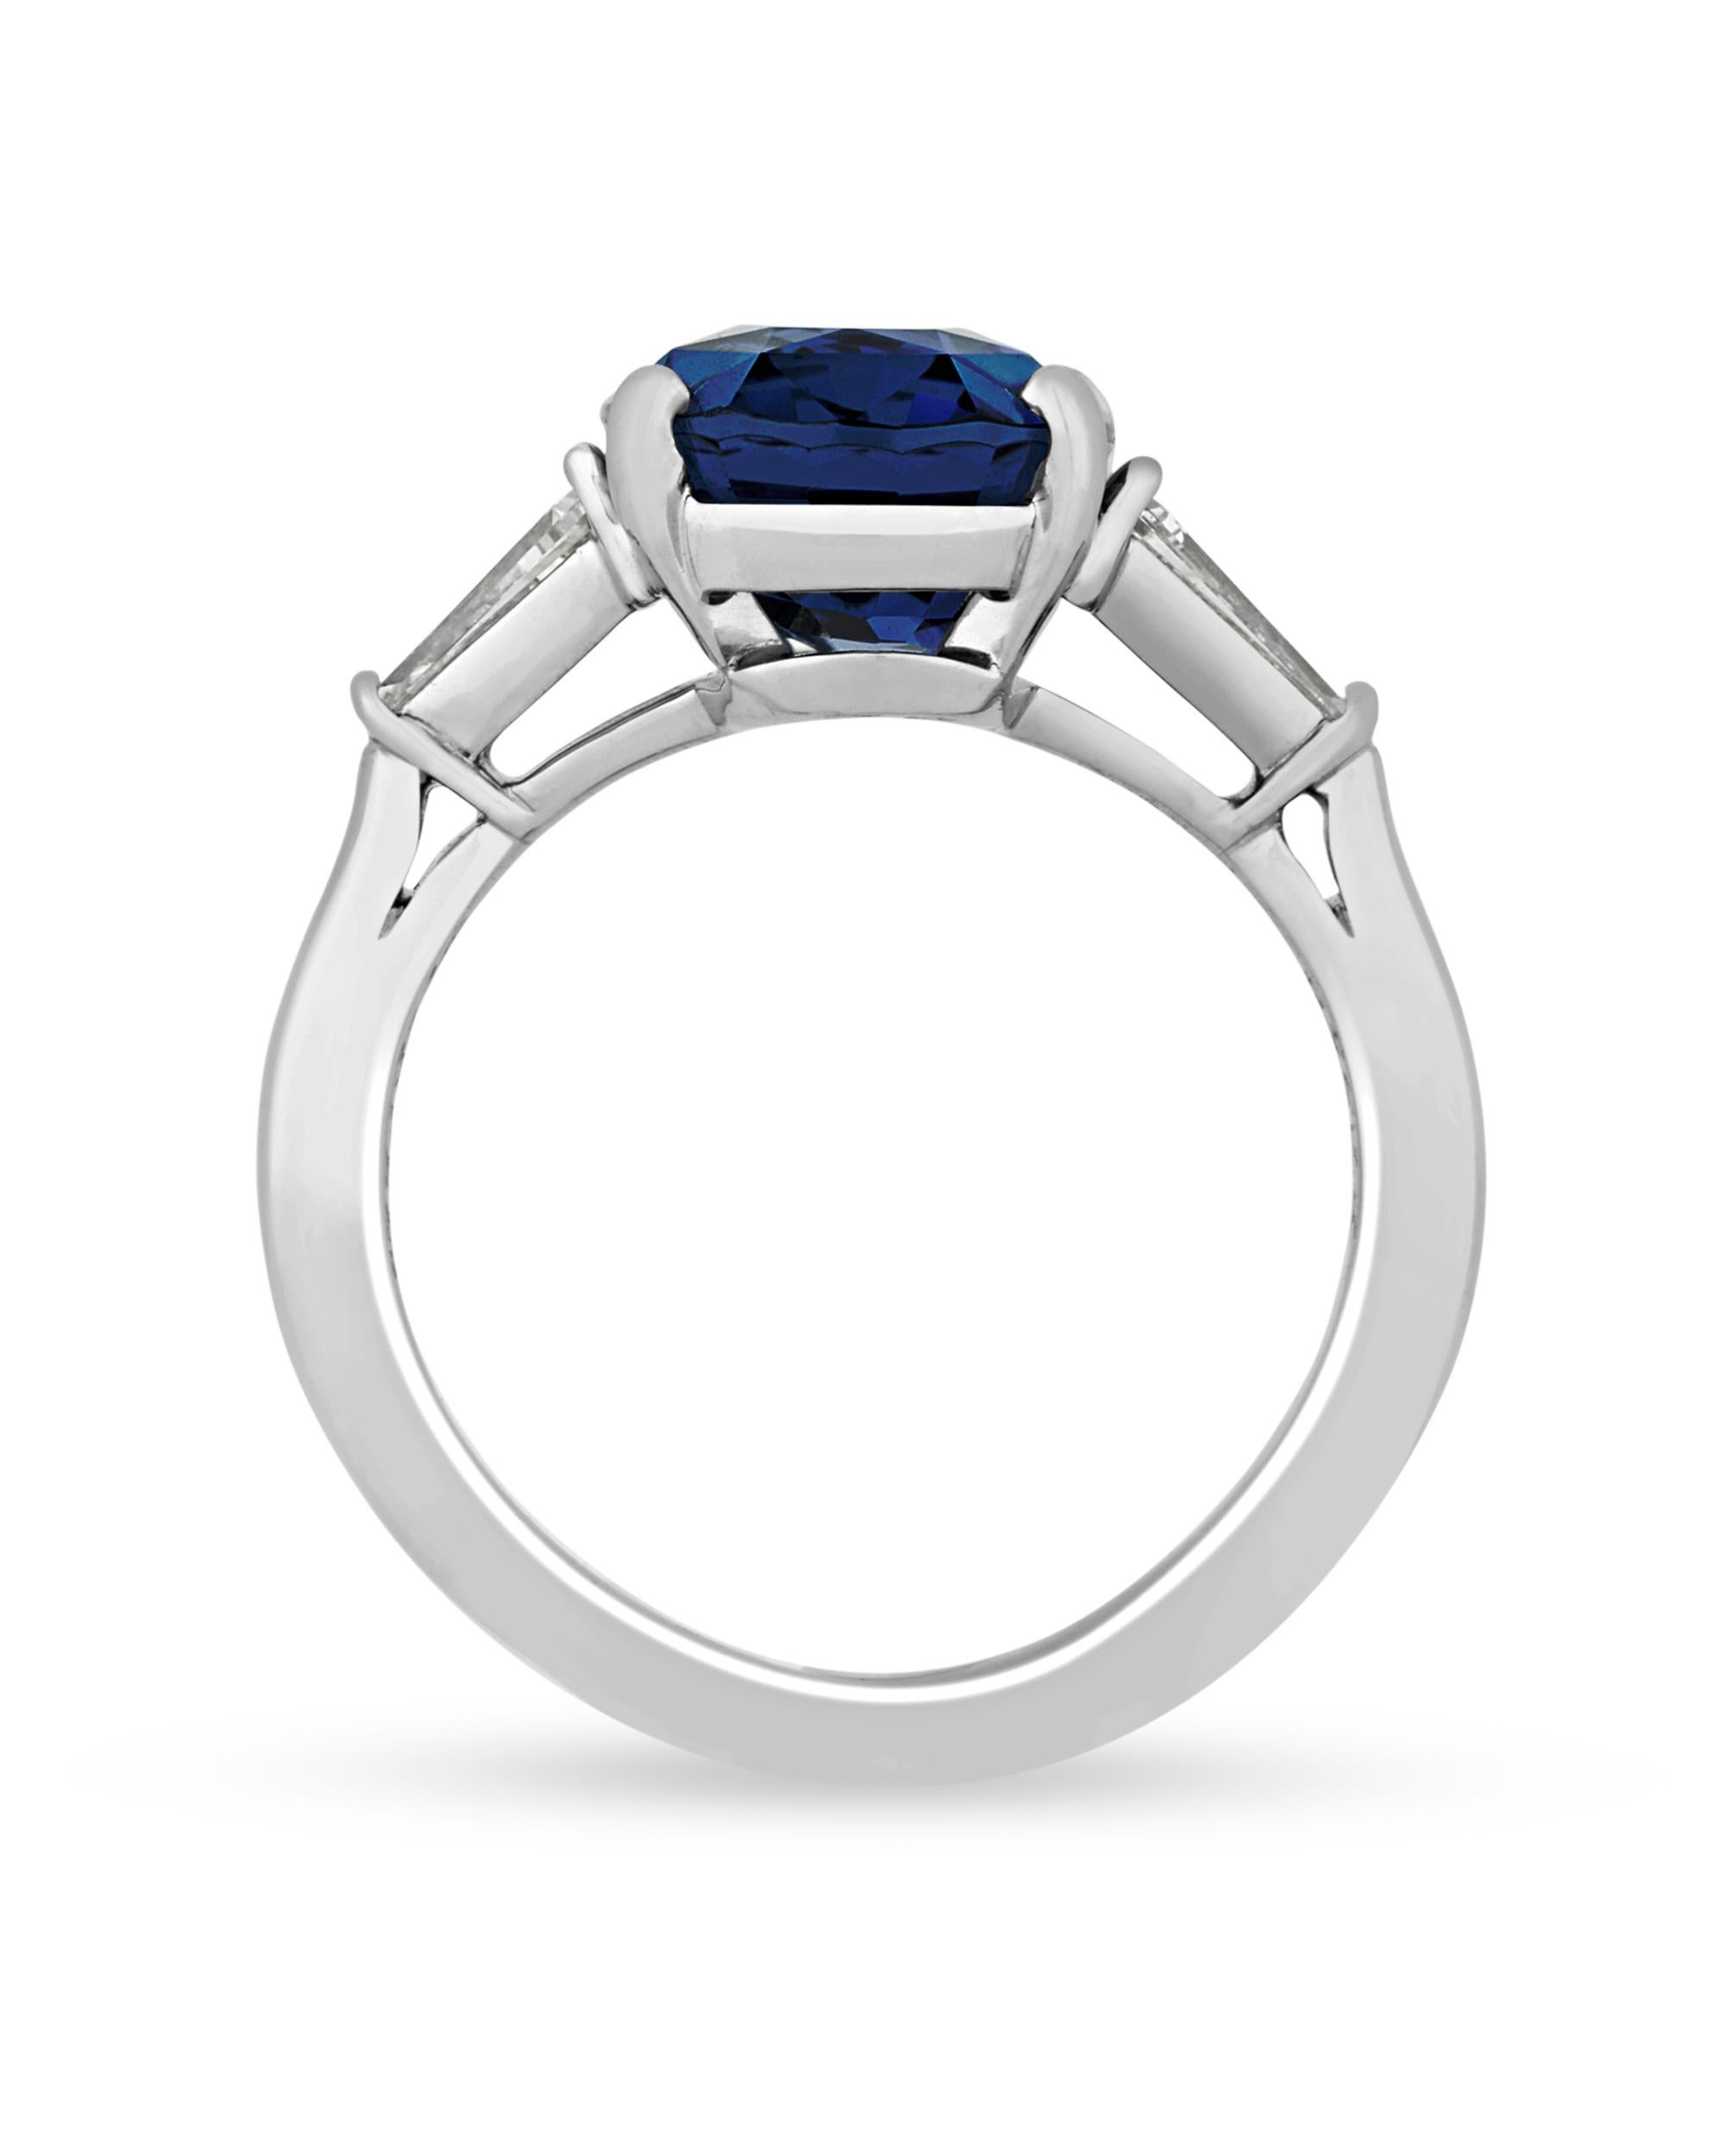 The breathtakingly vivid 5.54-carat sapphire in this Van Cleef & Arpels ring is certified by the Gemological Institute of America (GIA) as being Burmese and origin and completely natural, meaning it has undergone no enhancements to achieve its